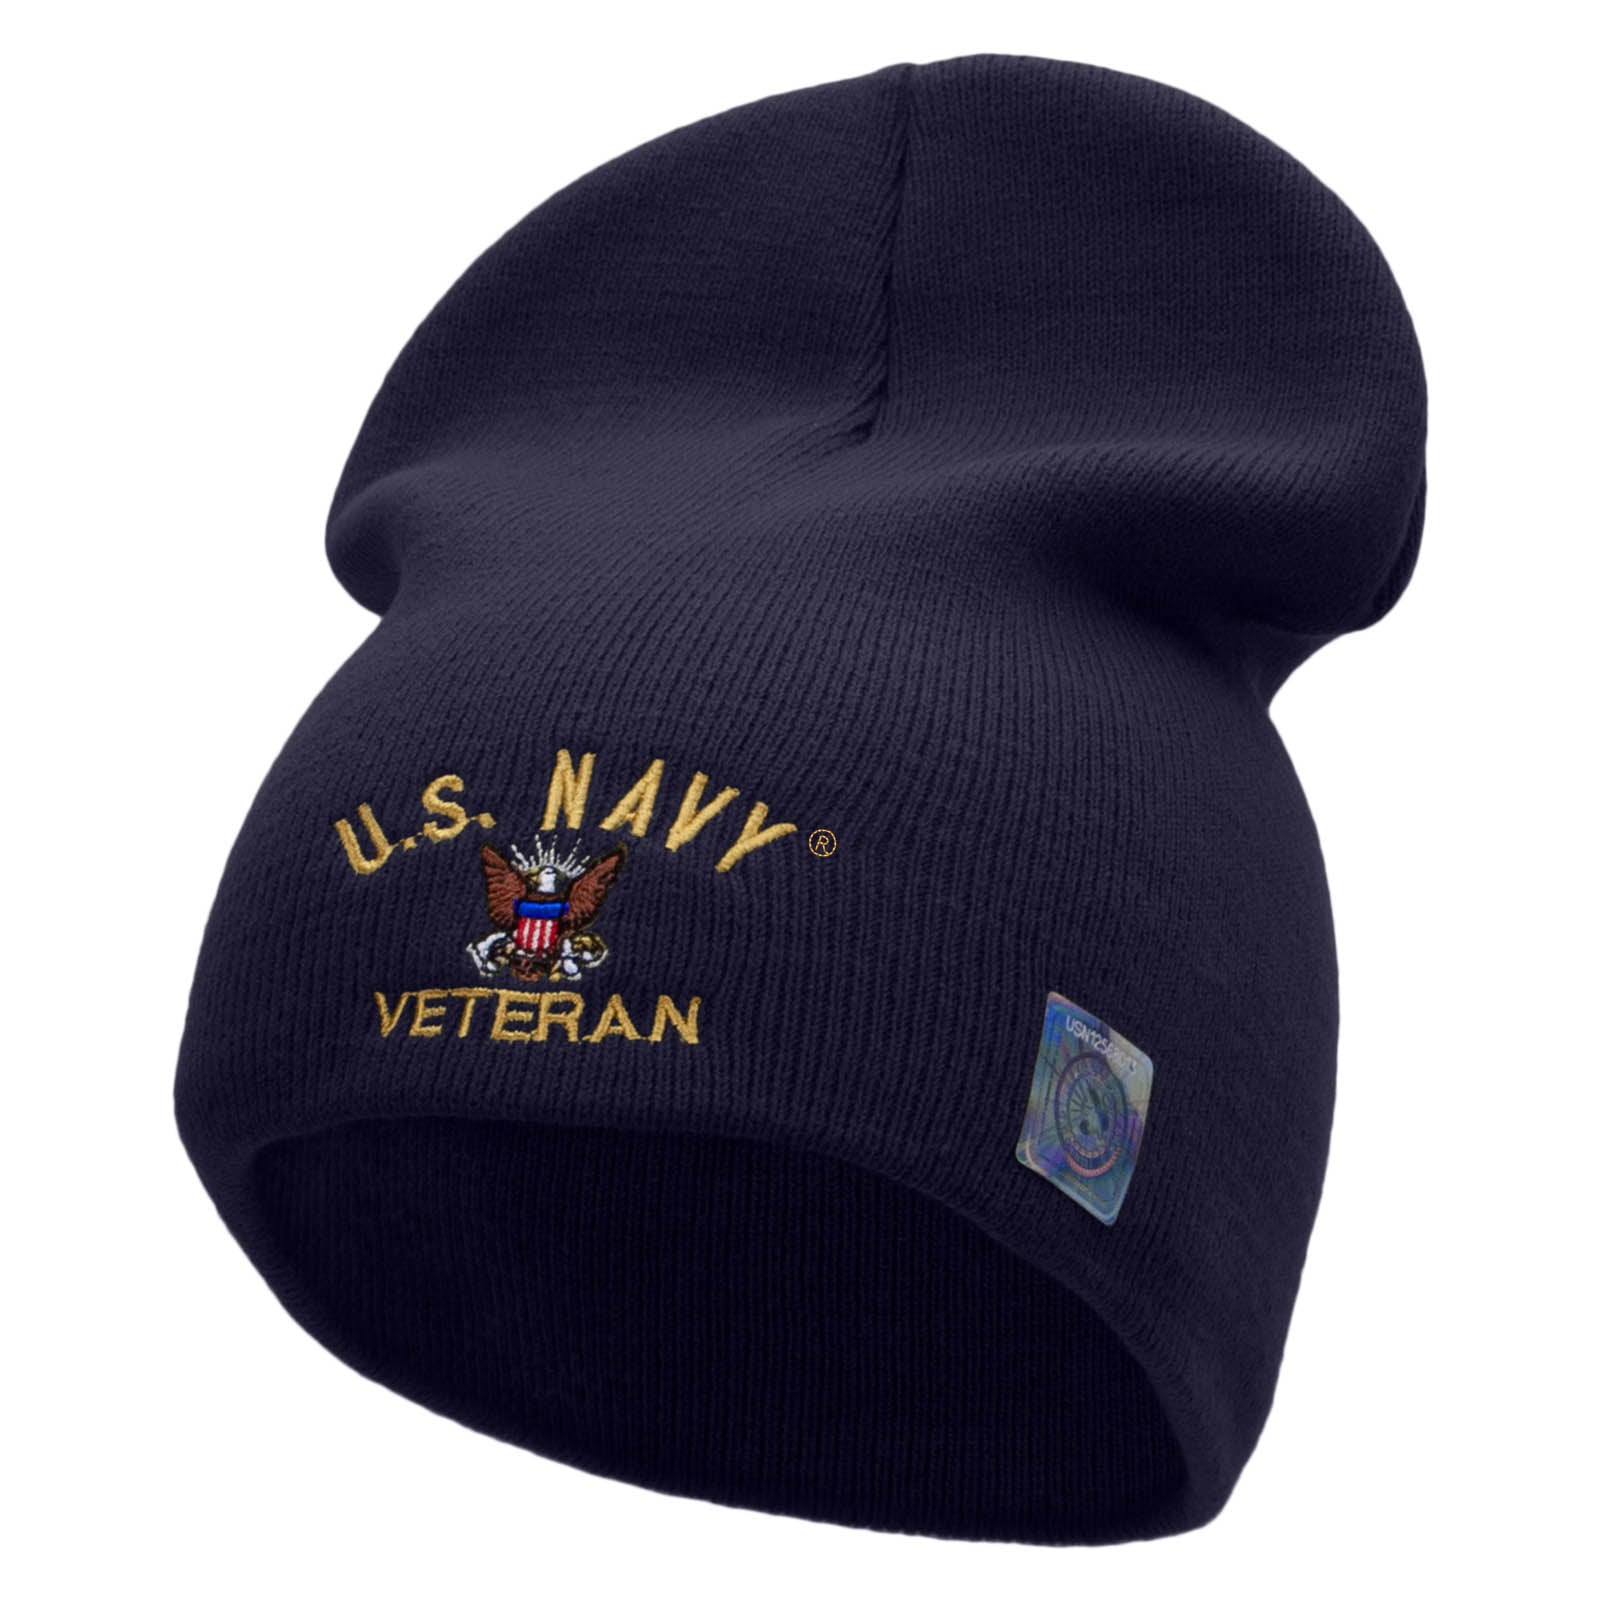 Licensed US Navy Veteran Military Embroidered Short Beanie Made in USA - Navy OSFM